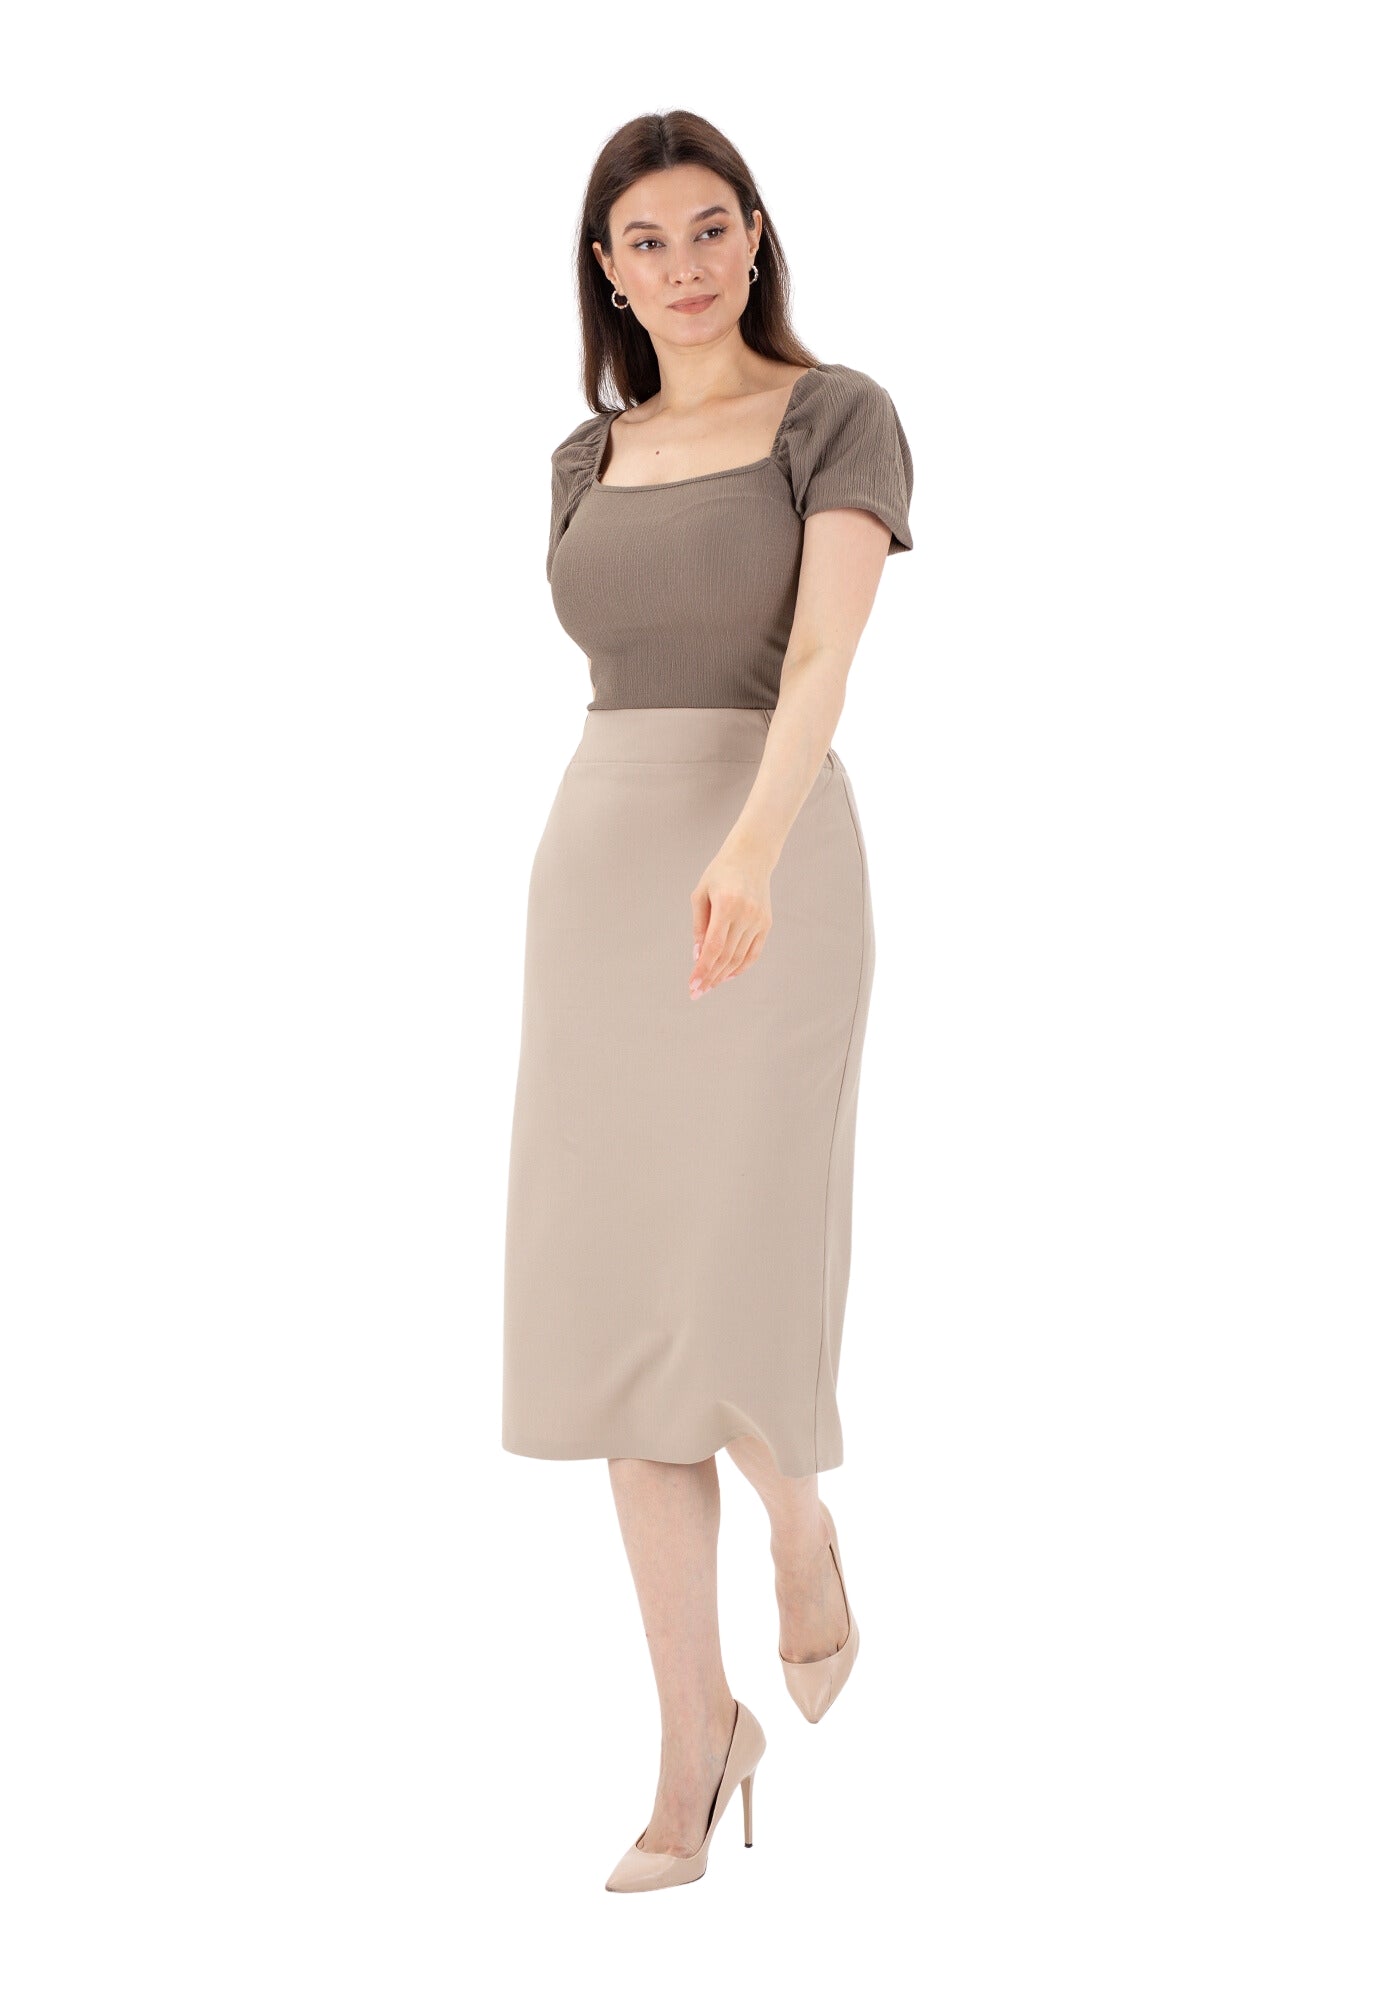 Stone Midi Pencil Skirt with Elastic Waist and Closed Back Vent G-Line